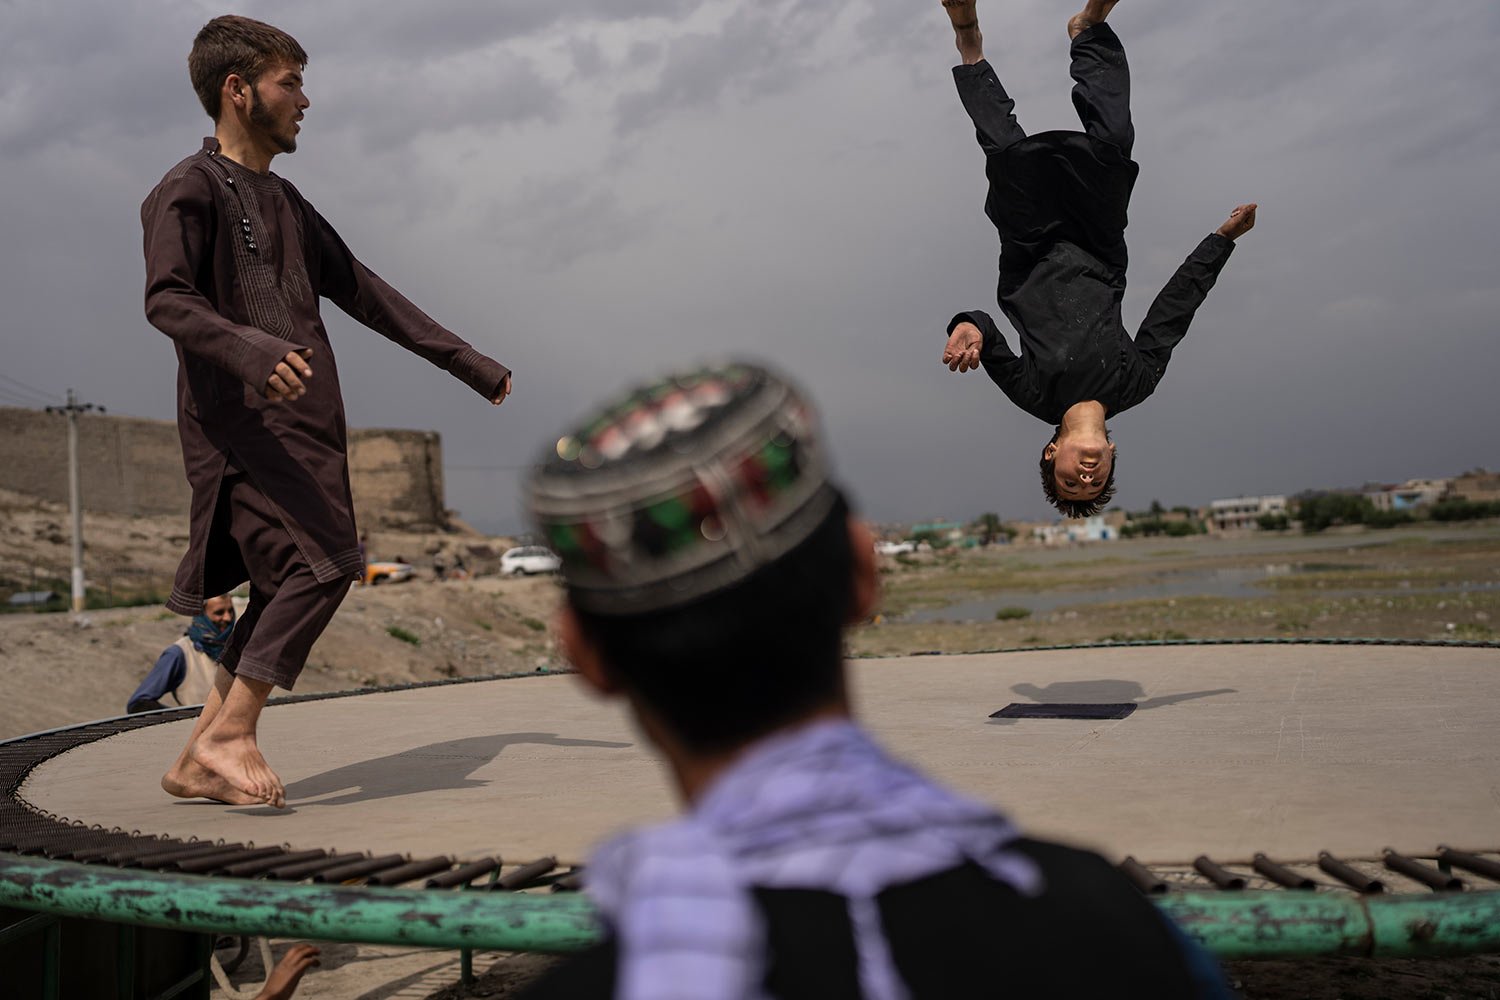  Children jump on a trampoline at a public park in Kabul, Afghanistan, Wednesday, May 31, 2023. (AP Photo/Rodrigo Abd) 